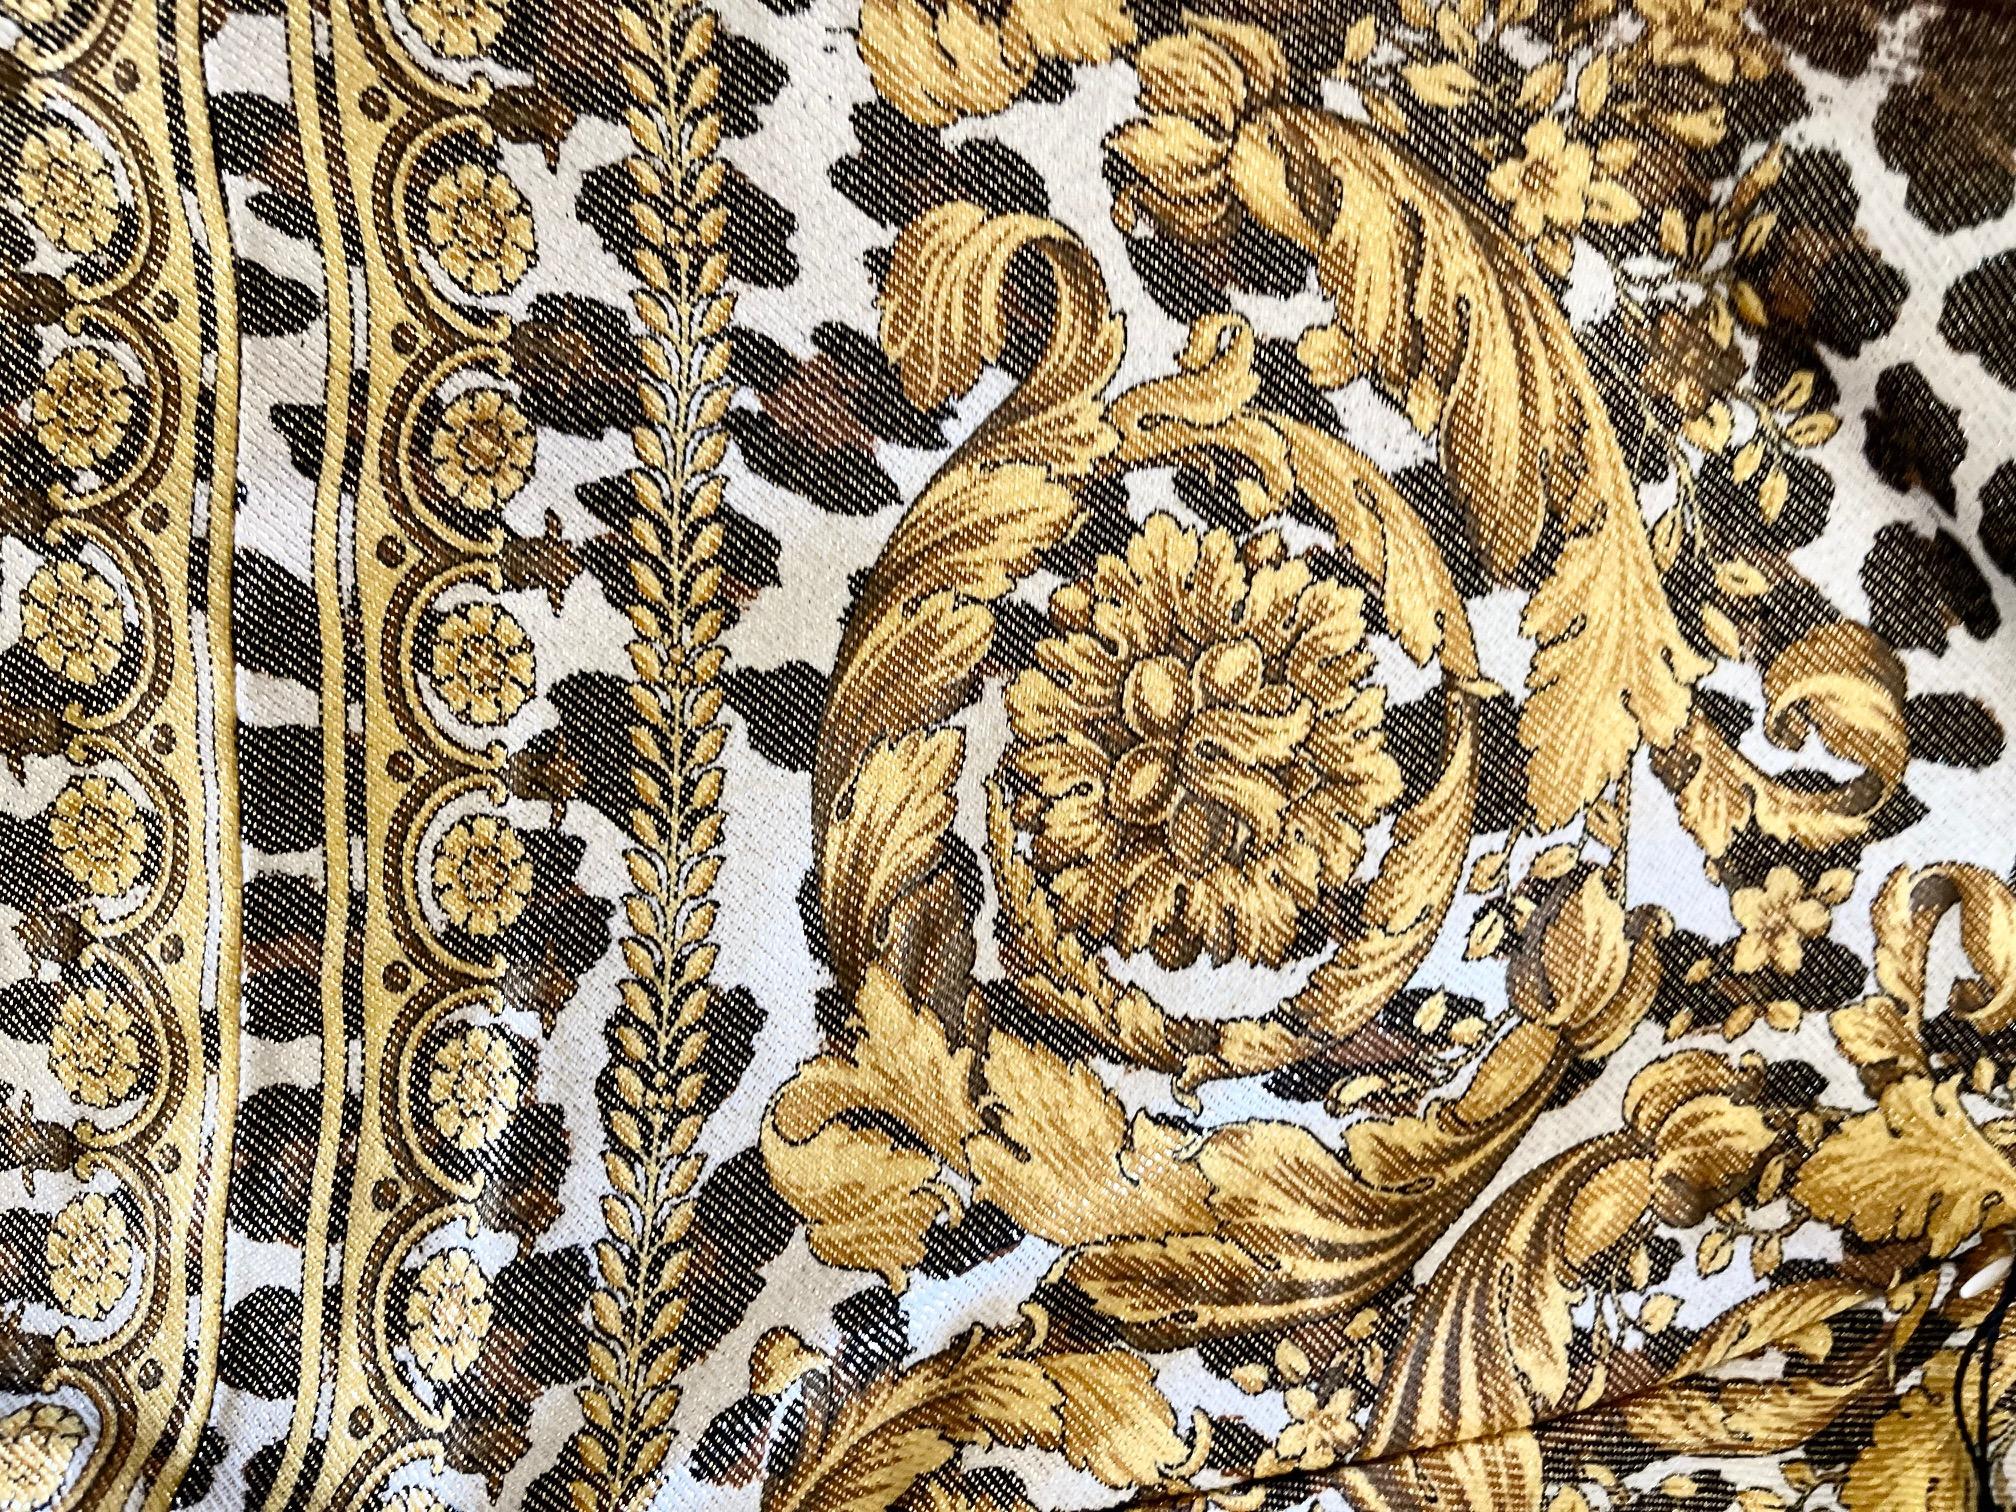 ANIMAL BAROQUE LEGGINGS from MIAMI MANSION GIANNI VERSACE PERSONAL COLLECTION For Sale 1